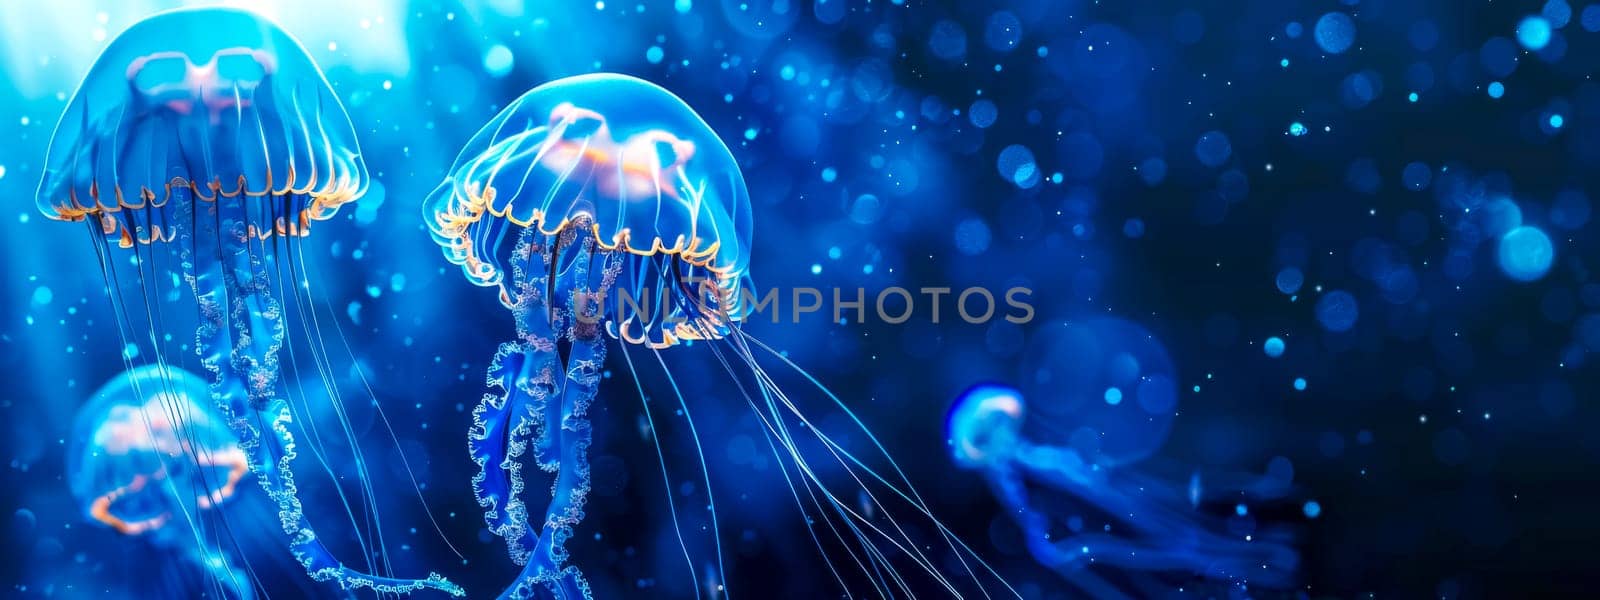 Neon jellyfish glowing with bio-luminescence against a dark blue ocean backdrop by Edophoto